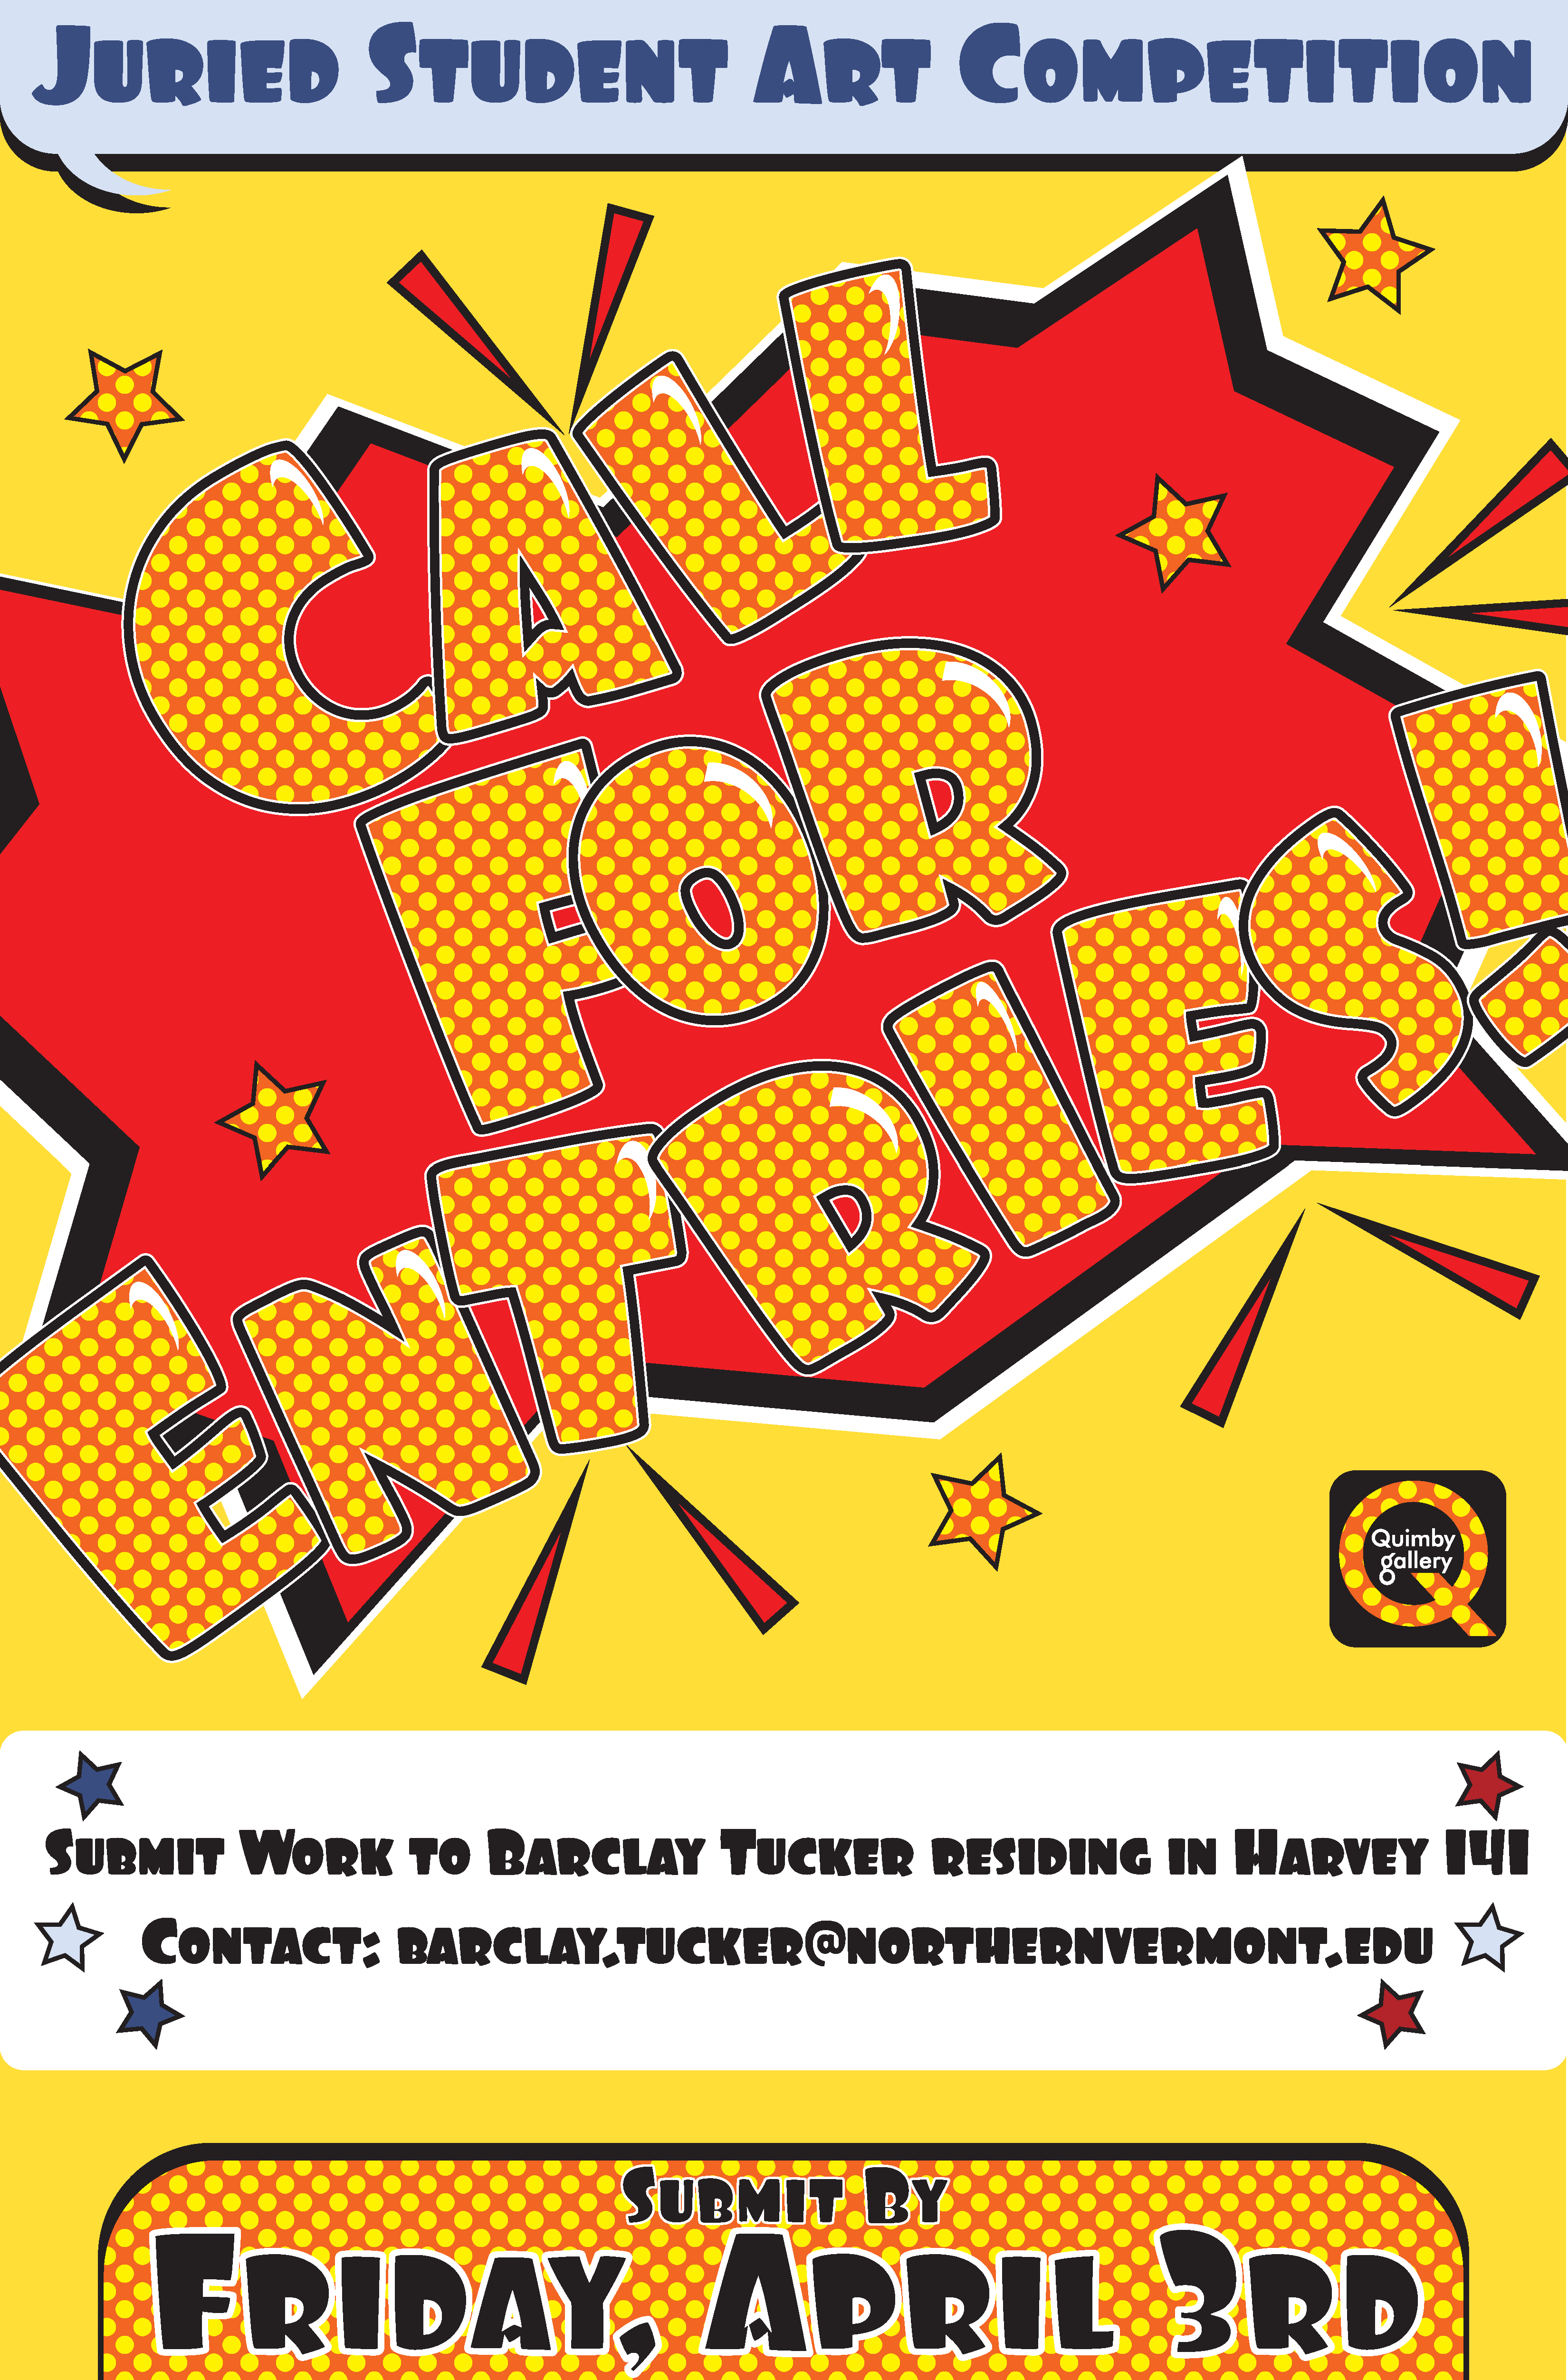 Call for Entries Poster